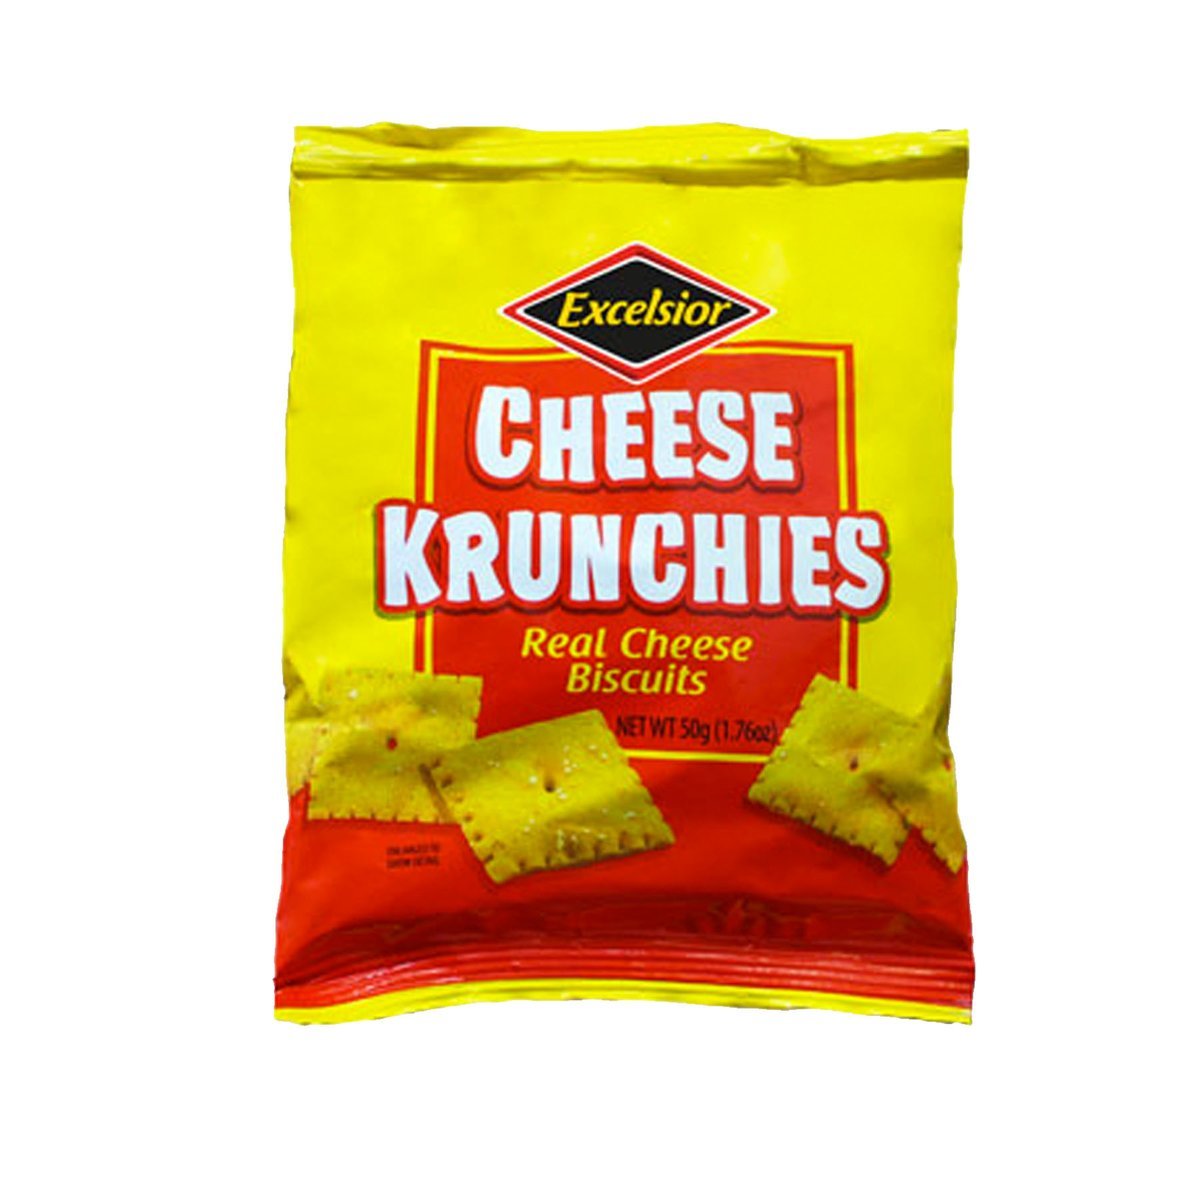 Excelsior Cheese Krunchies 50g Box of 24